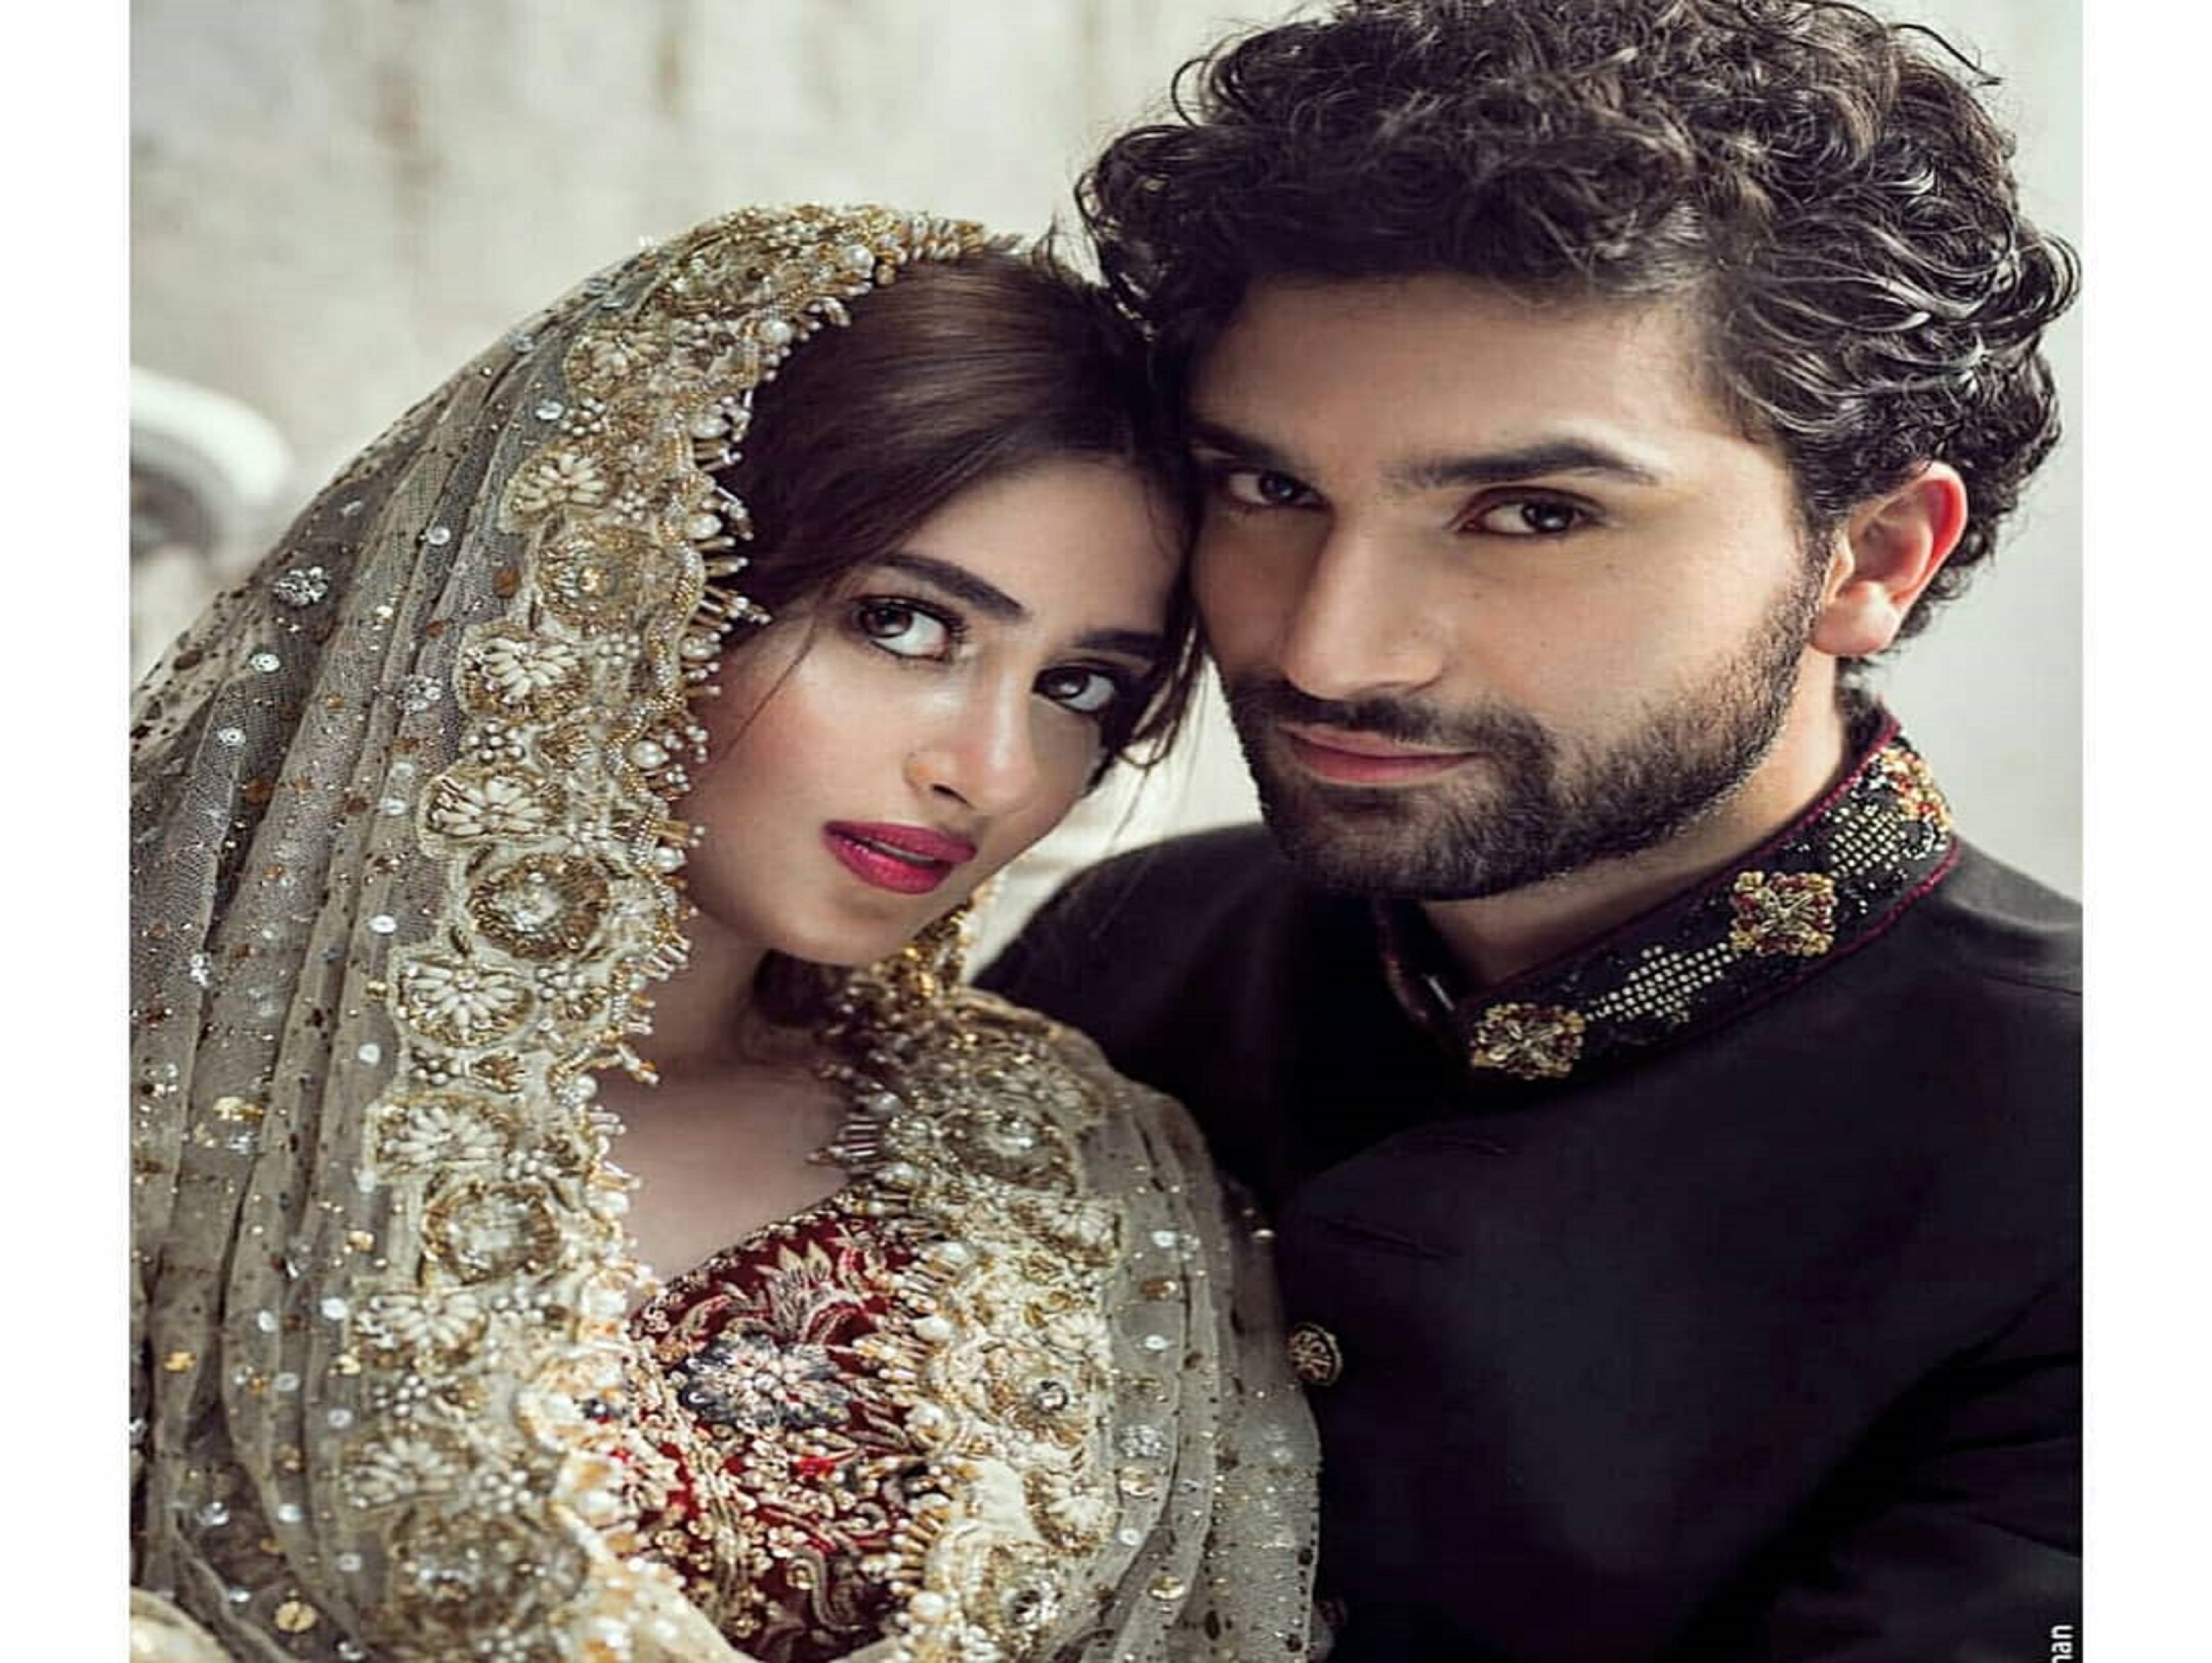 Ahad And Sajal Are Goals In This Bridal Shoot